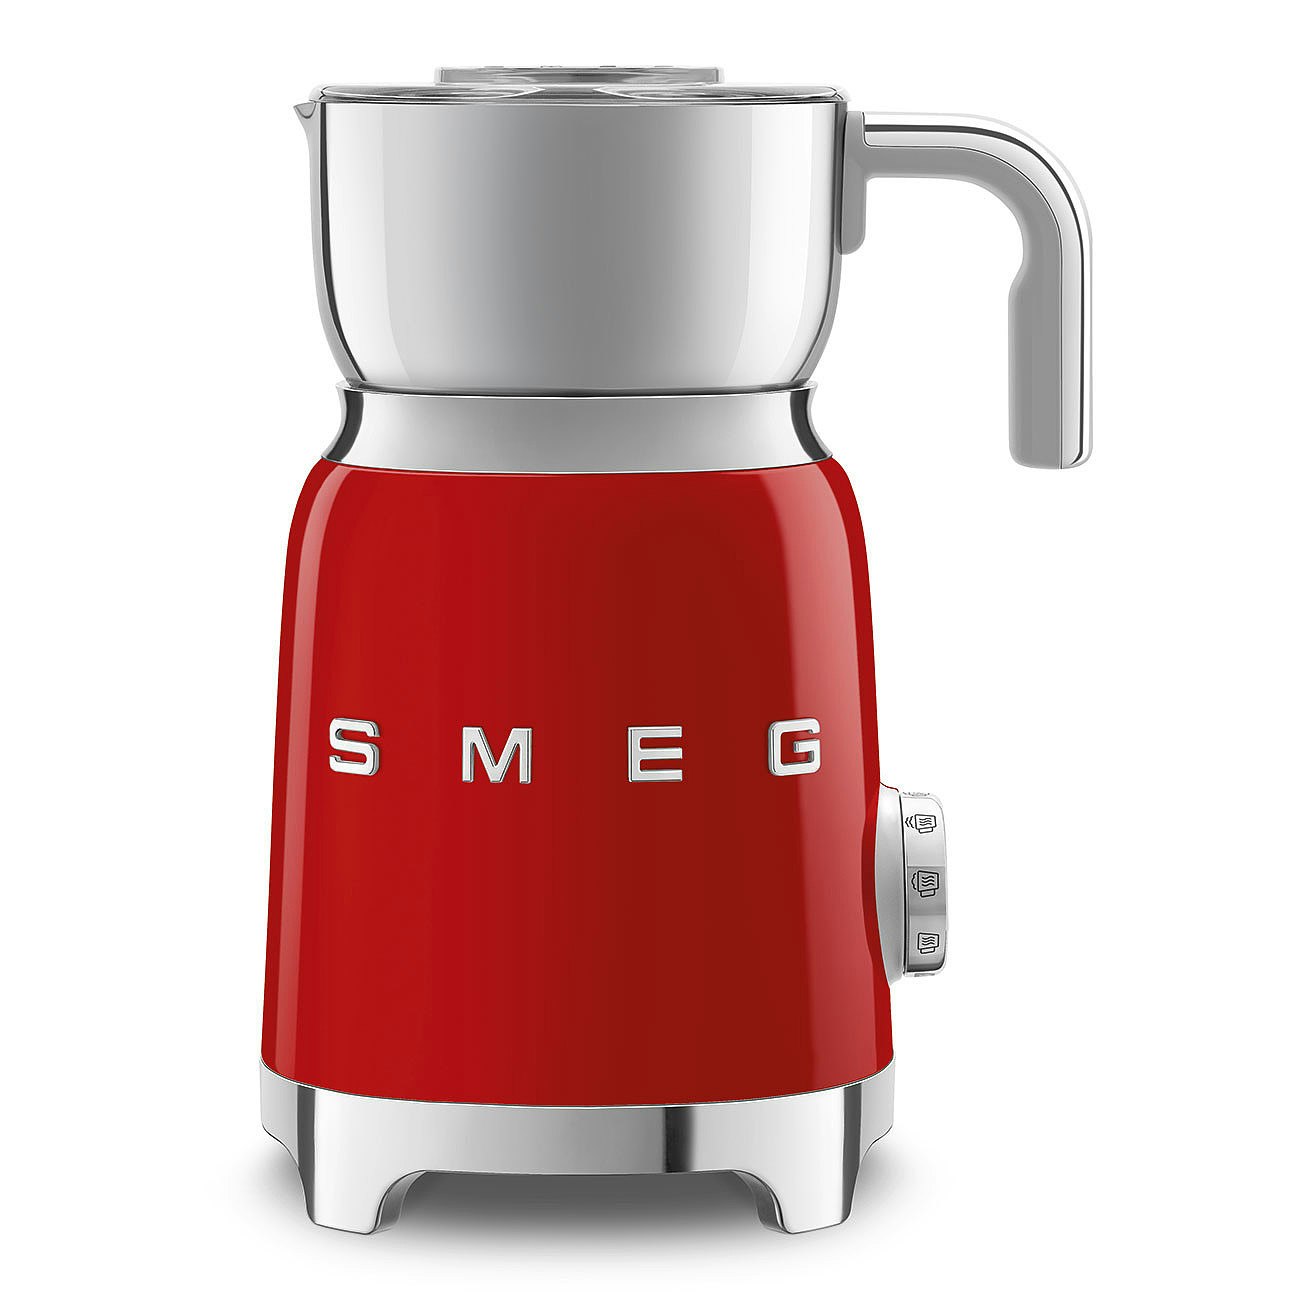 Smeg Milk Frother, Red